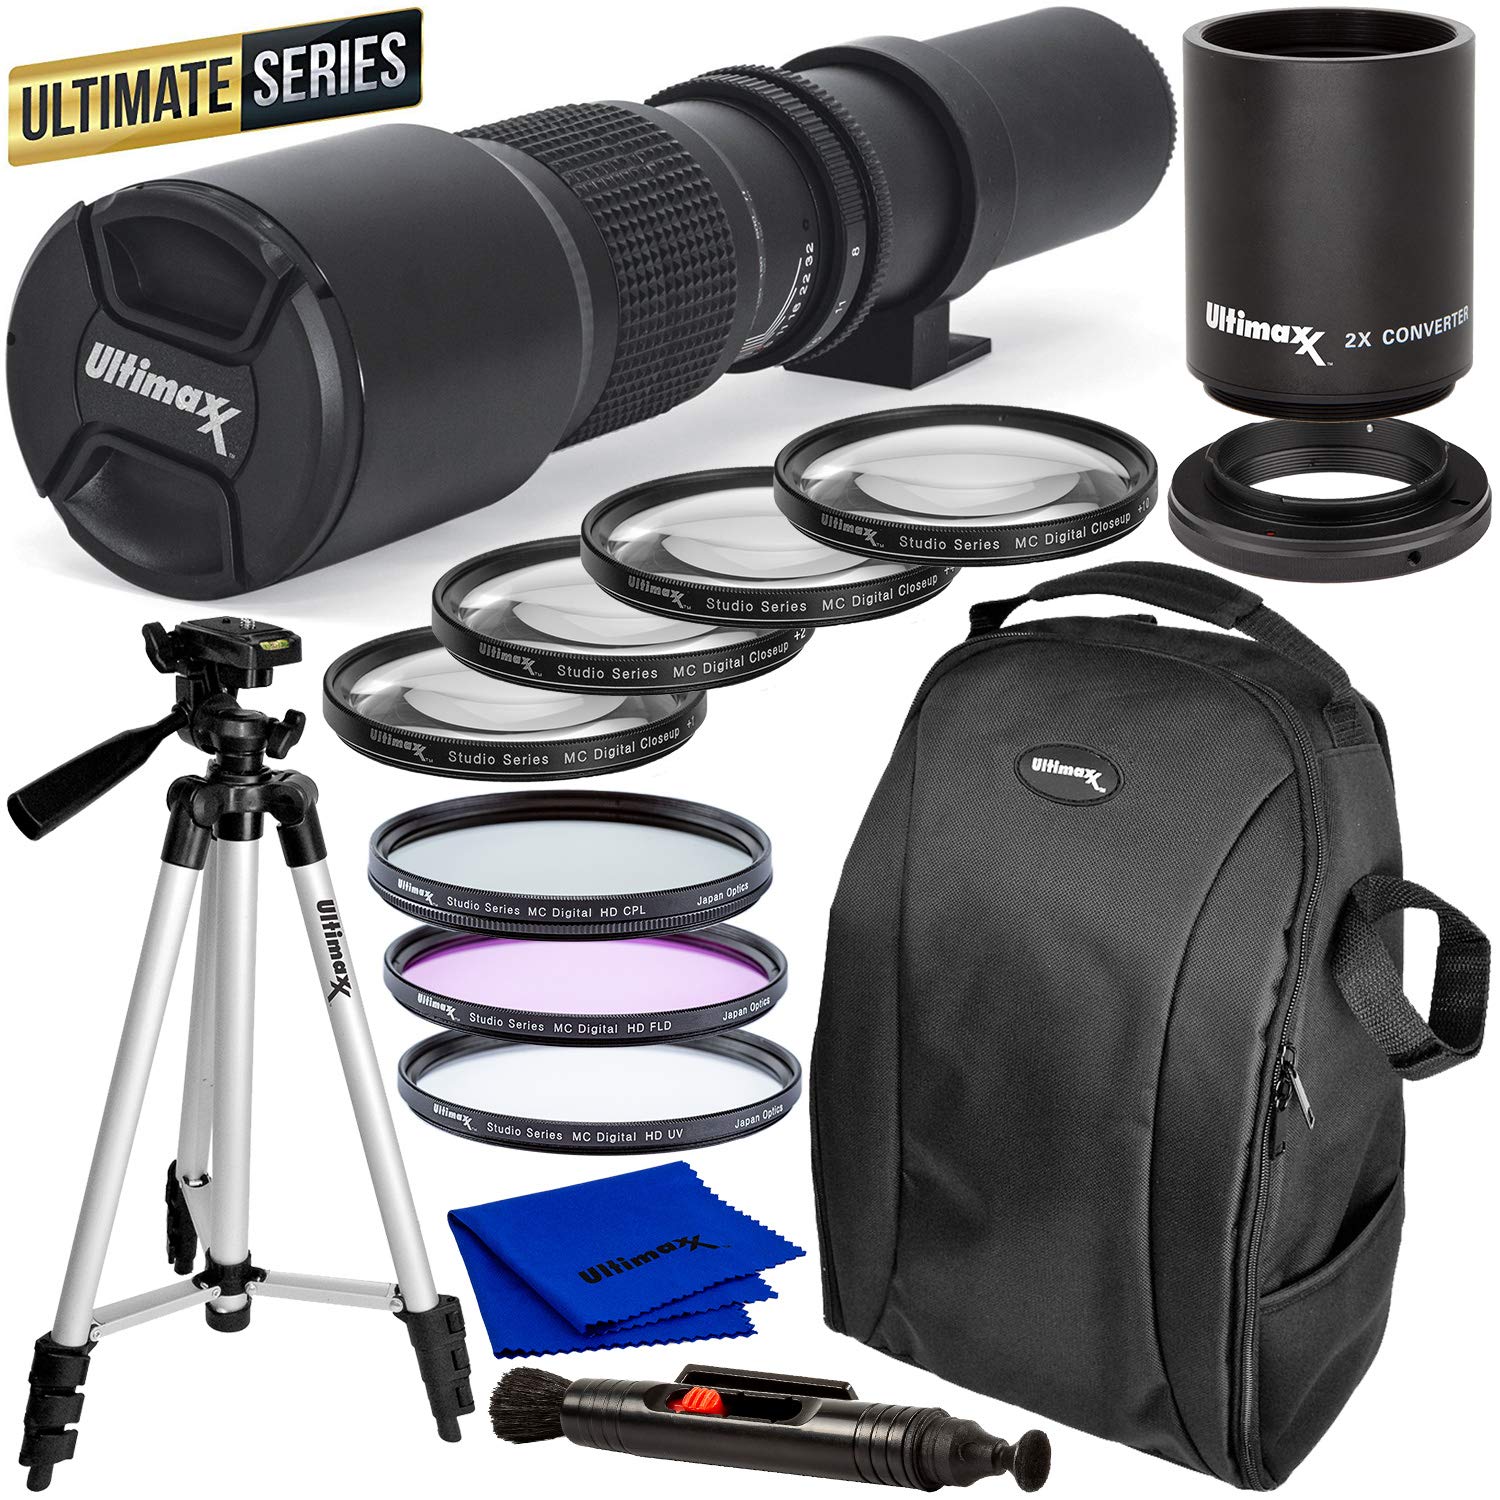 Ultimaxx High-Power 500mm/1000mm f/8 Manual Lens for Nikon F-Mount SLR/DSLR Cameras and Accessory Bundle